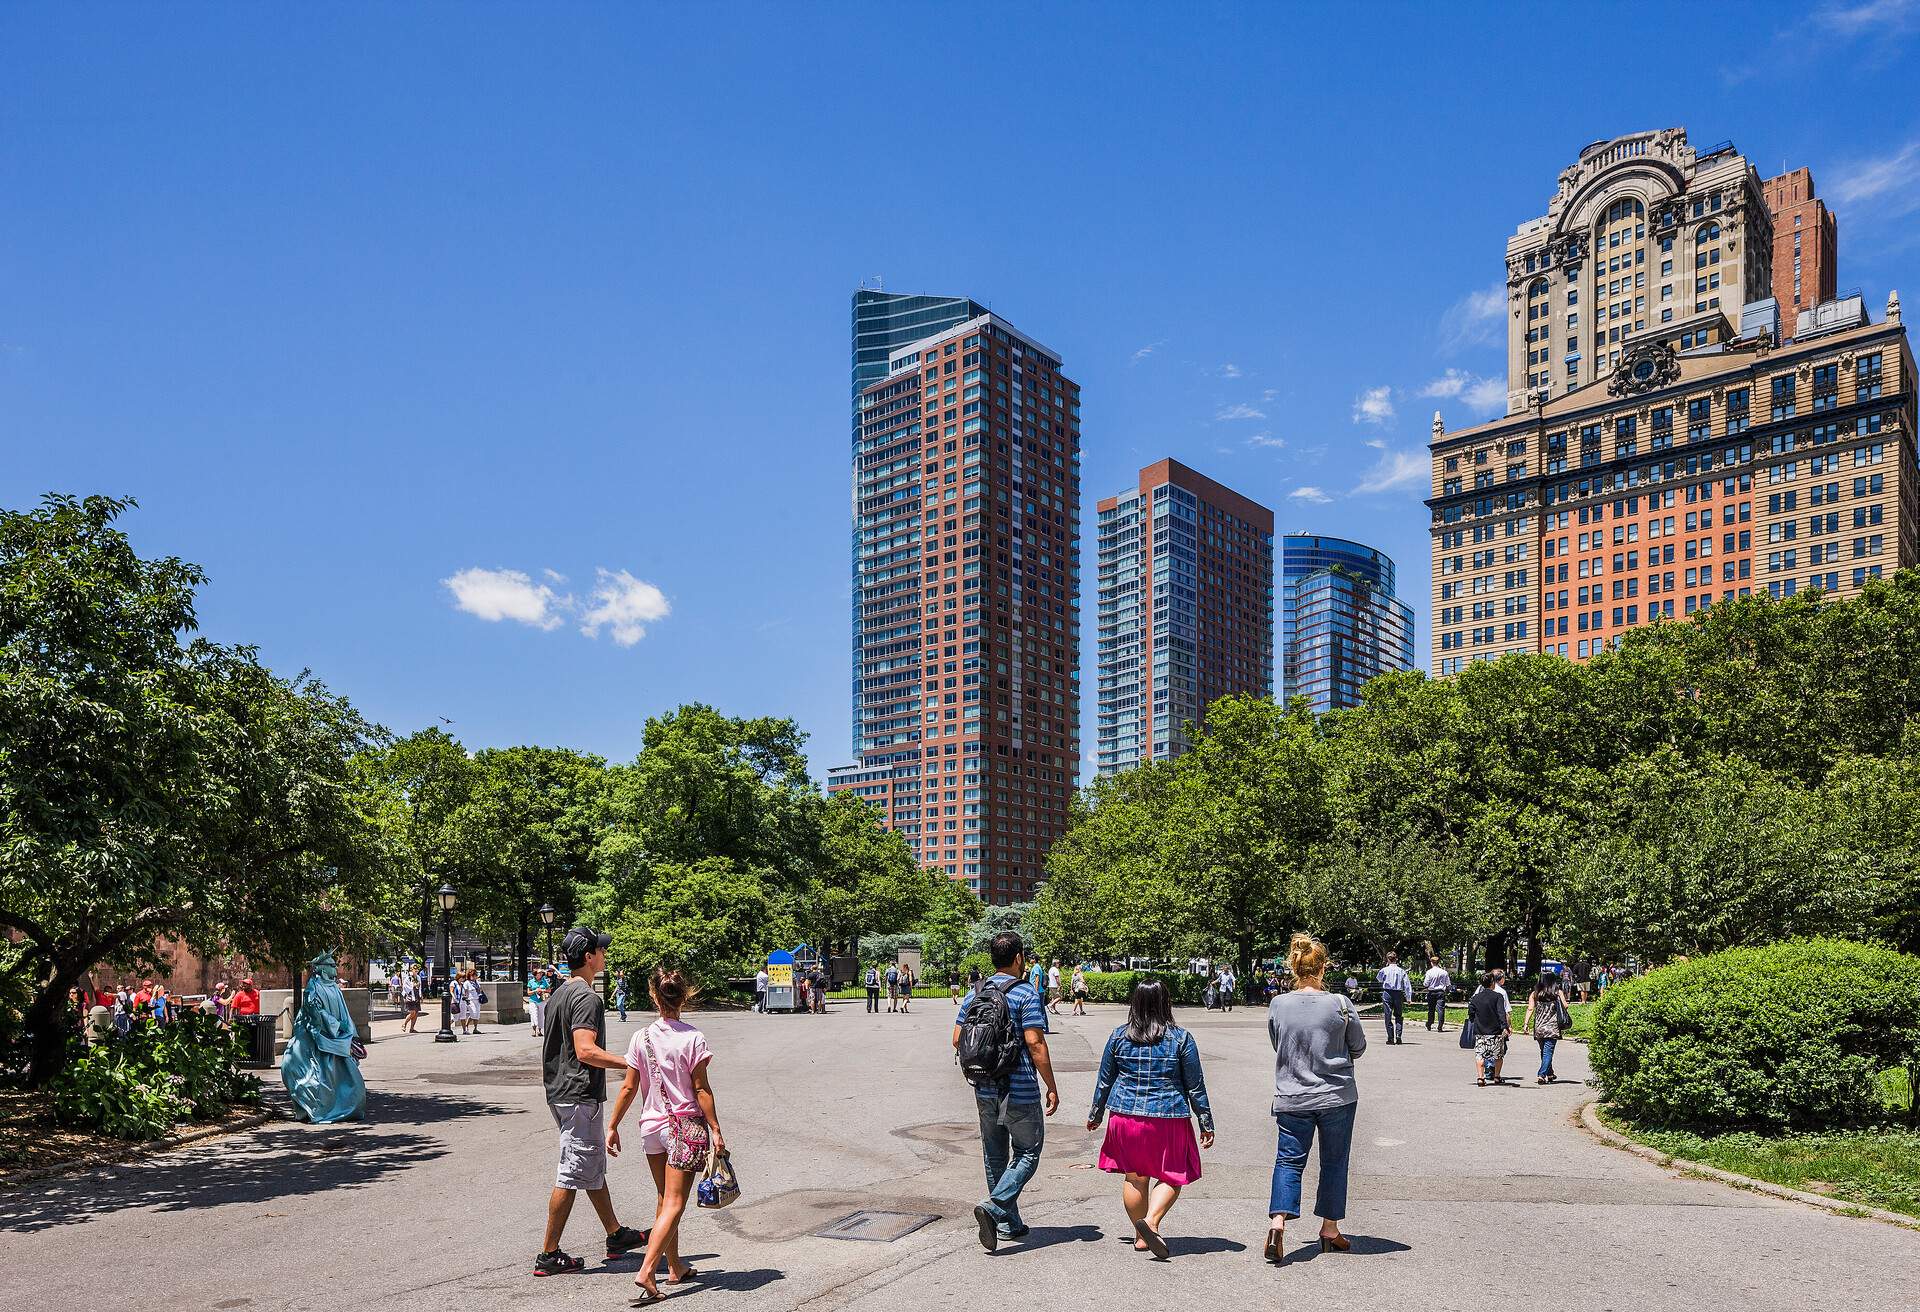 DEST_USA_NEW-YORK_NYC_BATTERY_PARK_GettyImages-534488297